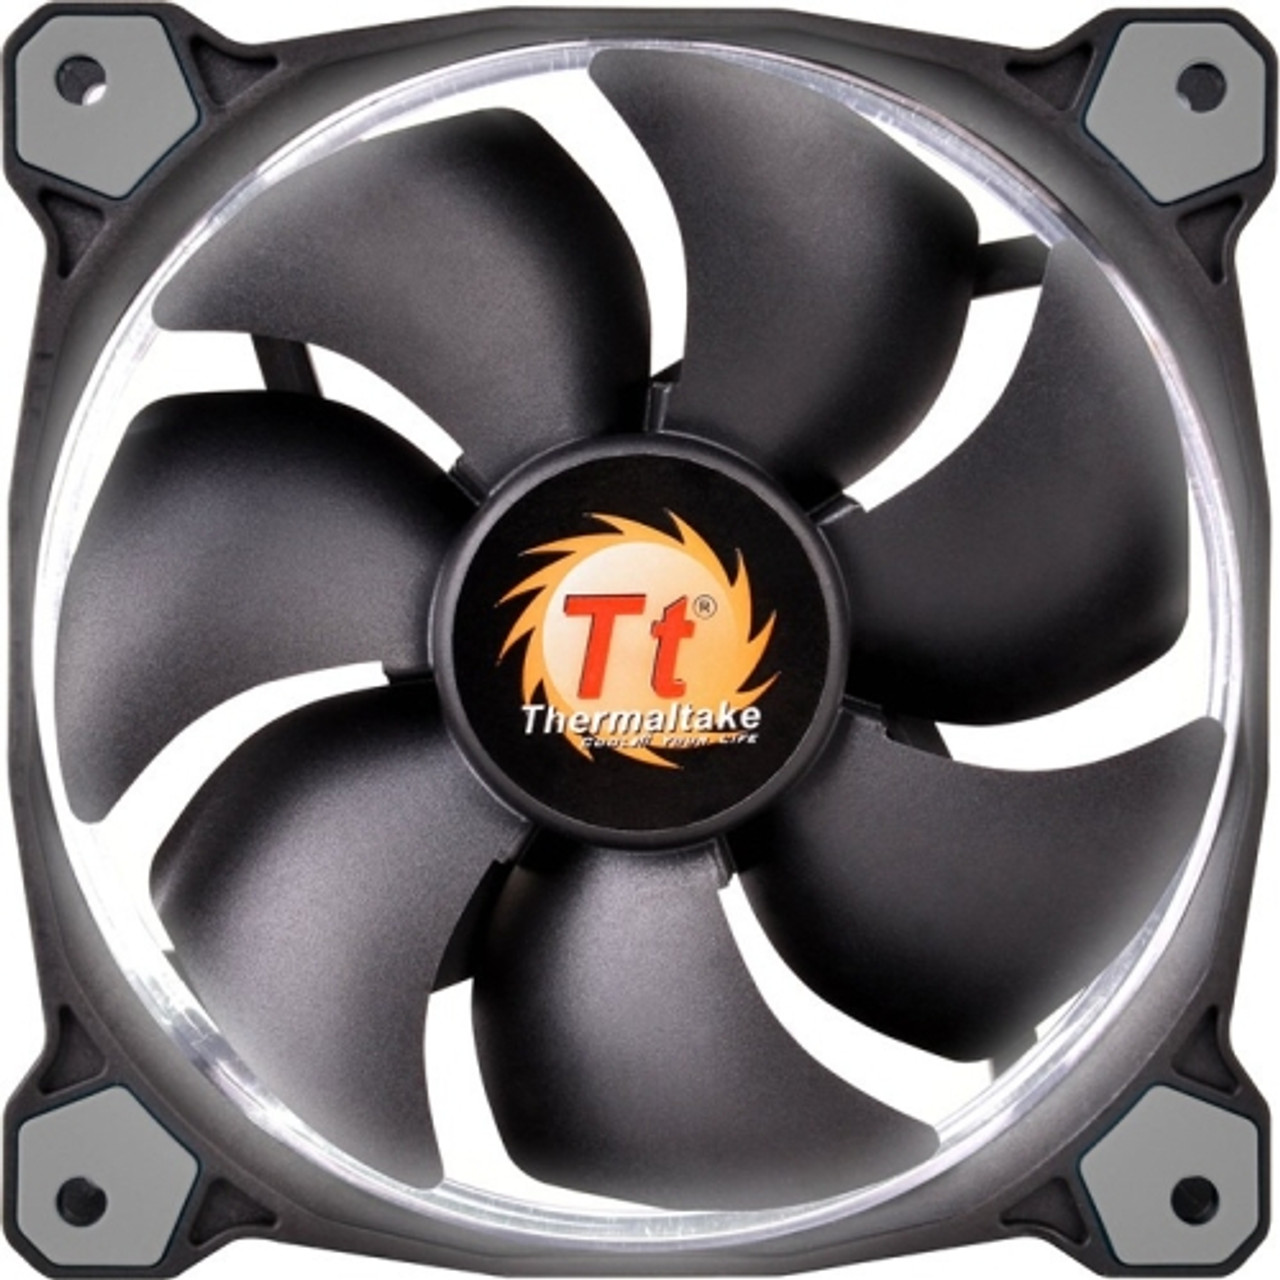 CL-F038-PL12WT-A Thermaltake Riing 12 LED White